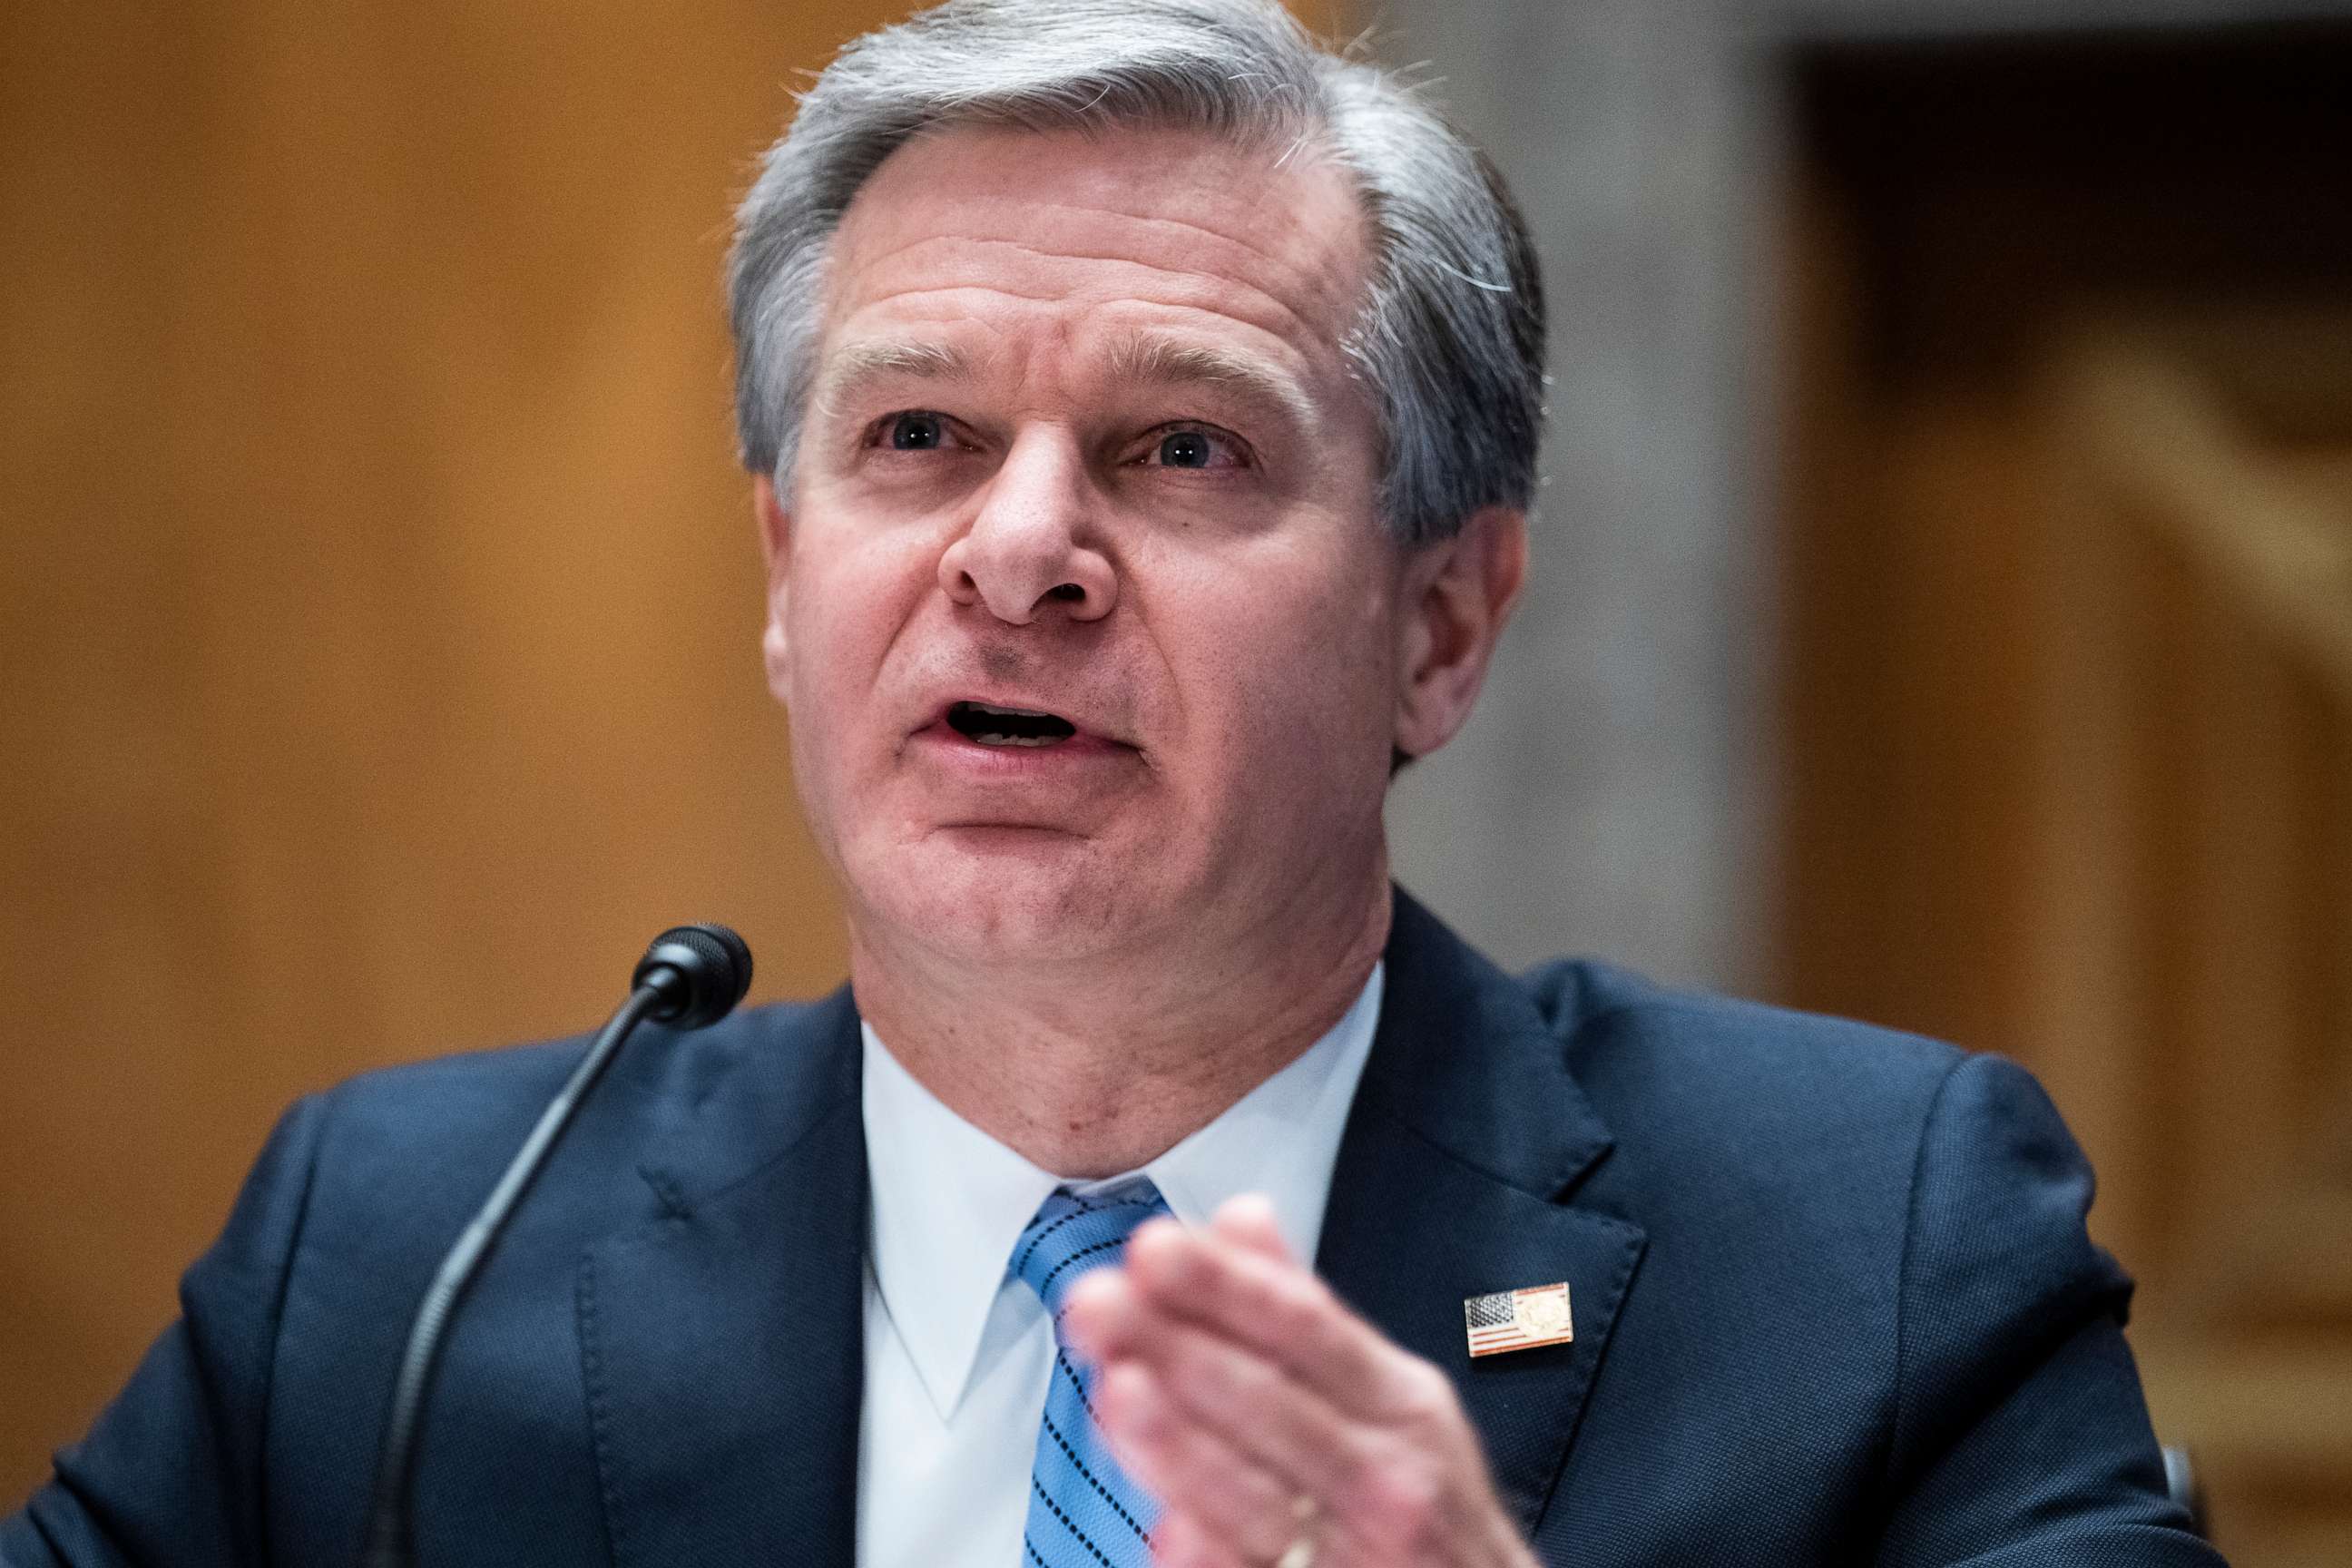 PHOTO: FBI Director Chris Wray testifies during the Senate Homeland Security and Governmental Affairs Committee hearing titled "Threats to the Homeland," in Dirksen Building, November 17, 2022.